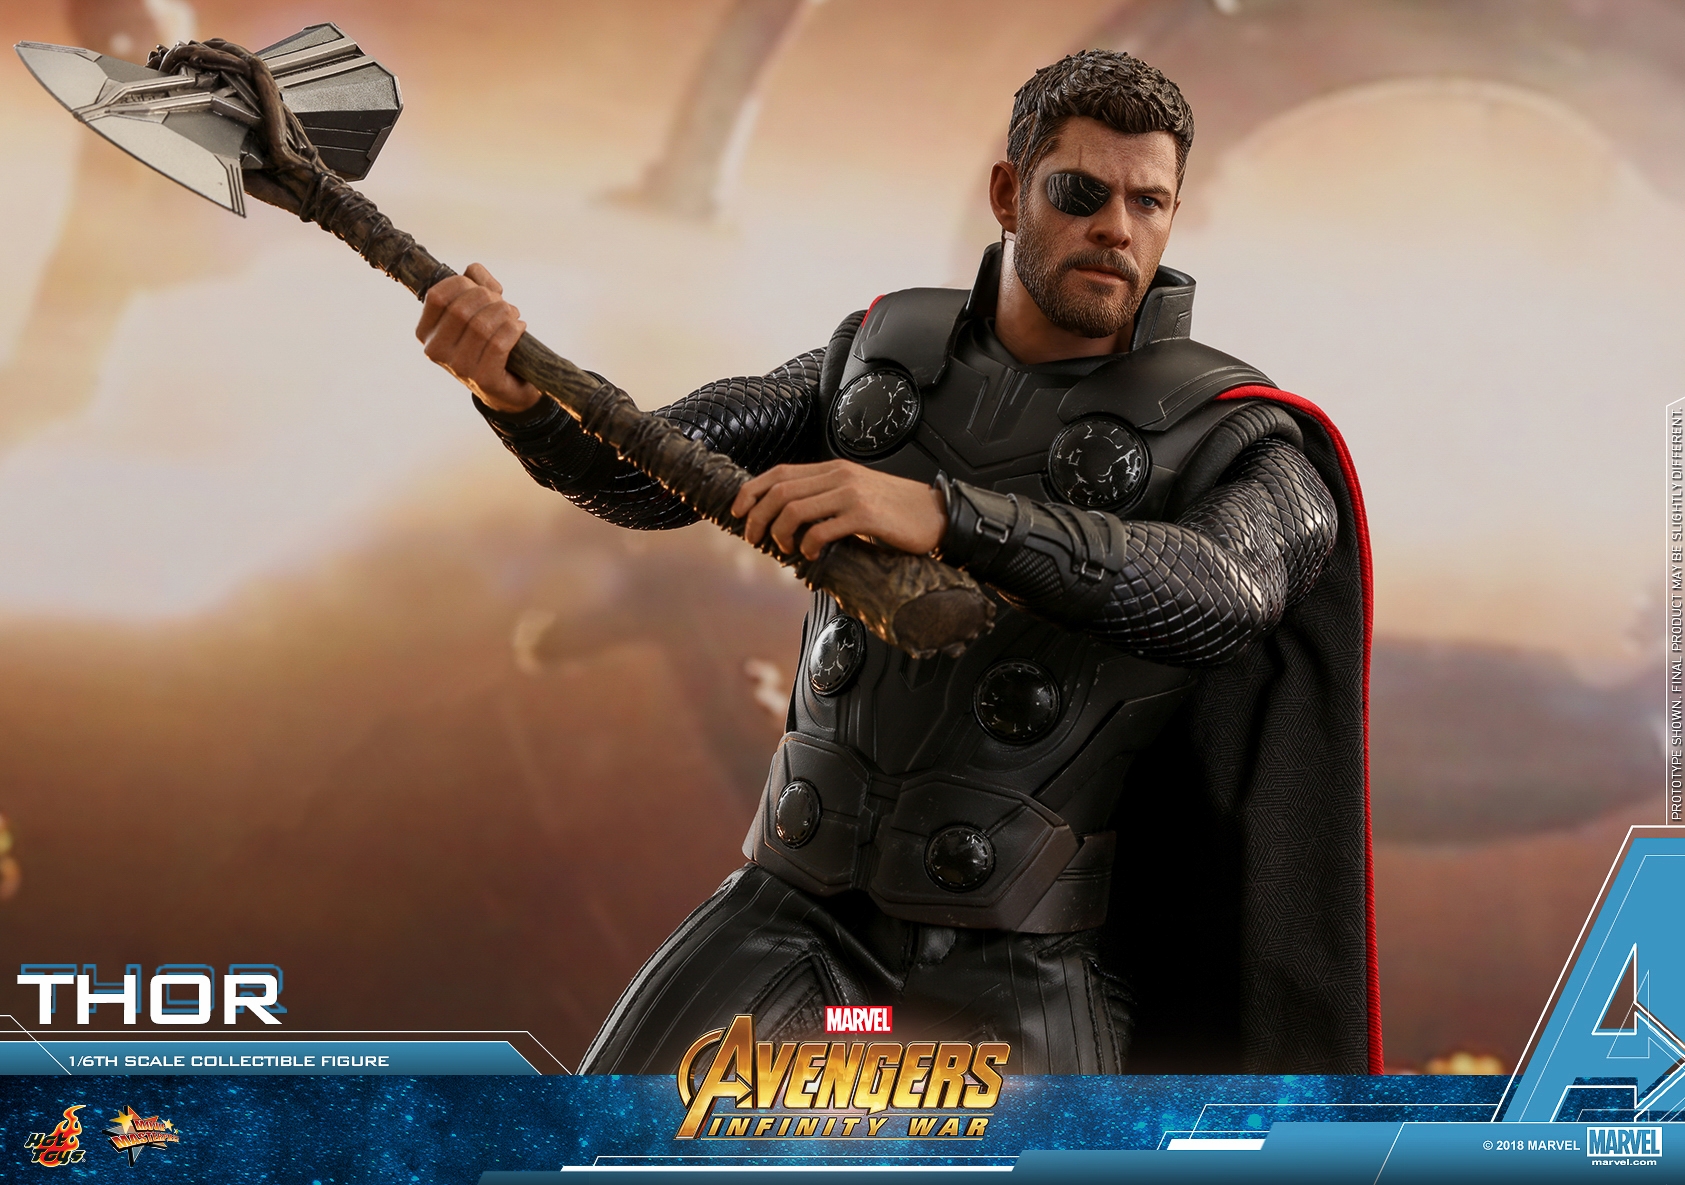 Hot-Toys-MMS474-Avengers-Infinity-War-Thor-Collectible-Figure-012.jpg